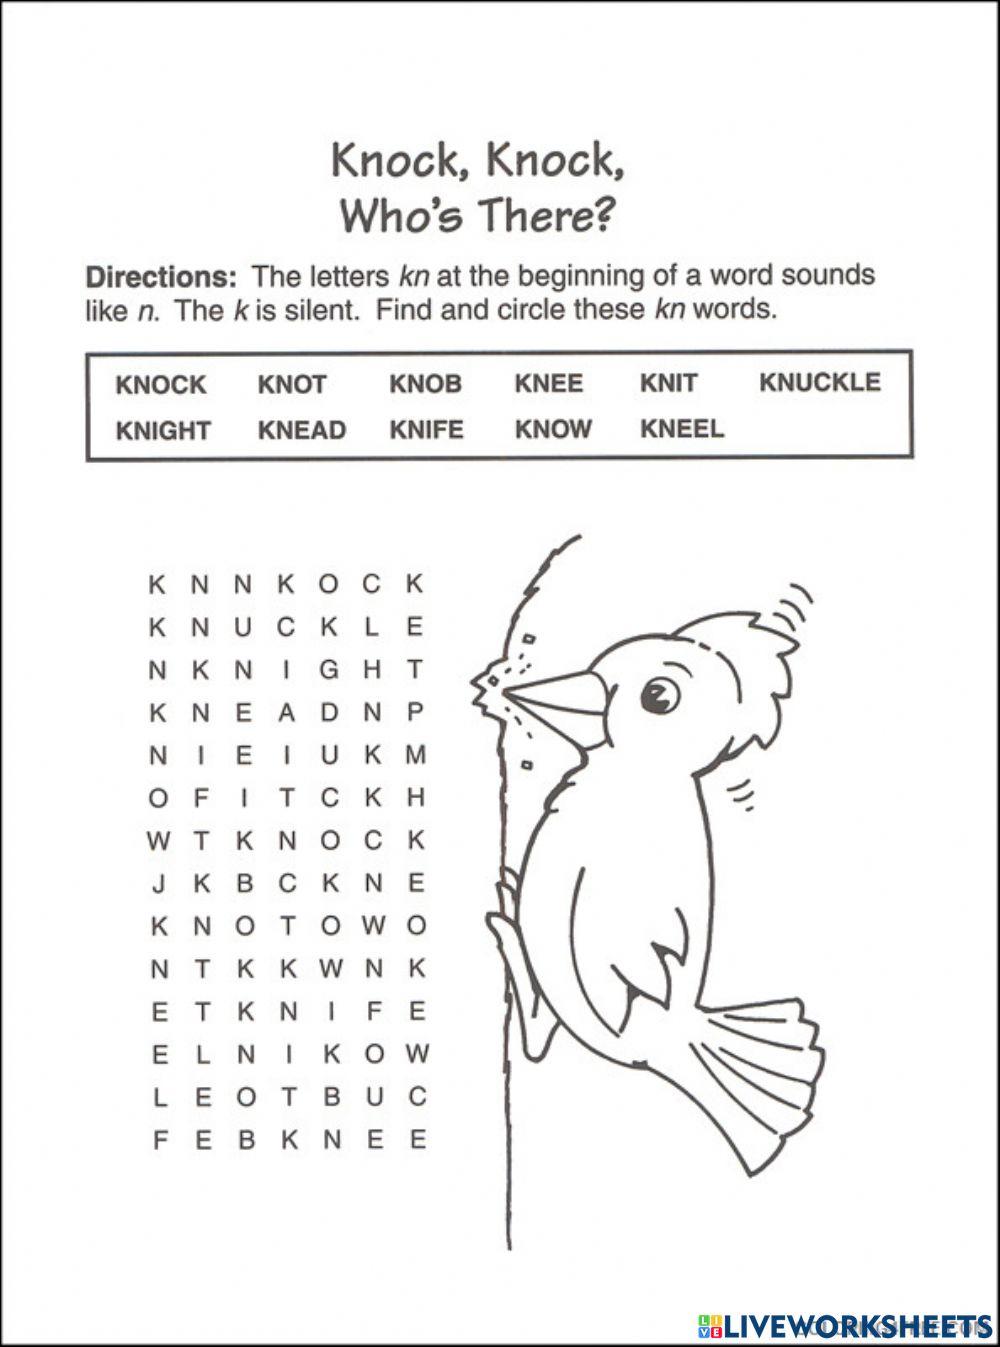 Kn word search